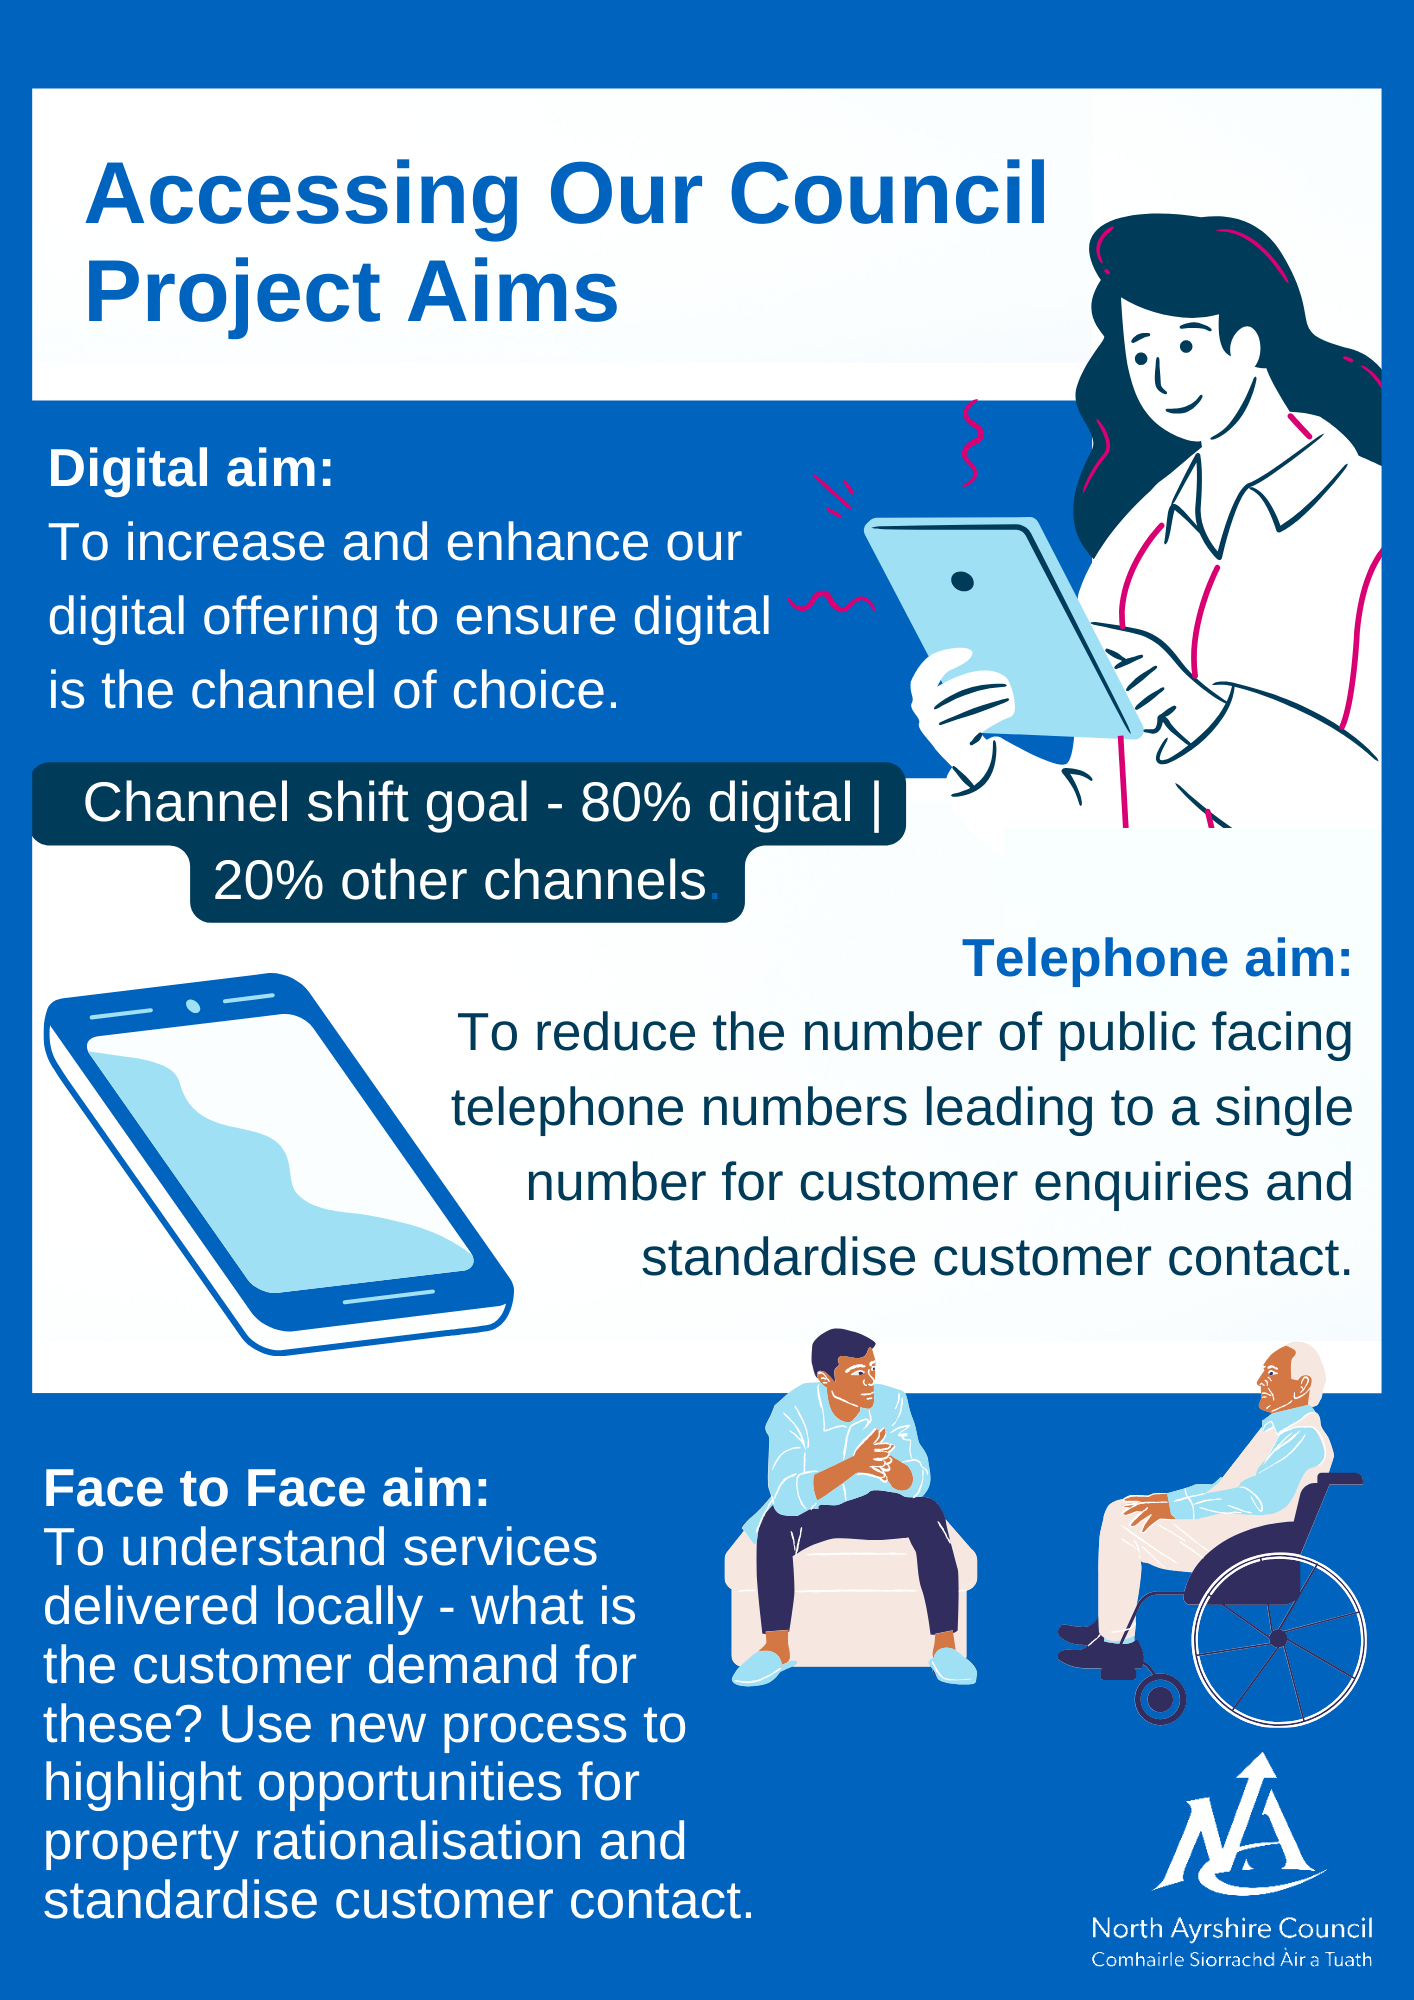 Accessing Our Council Project Aims infographic